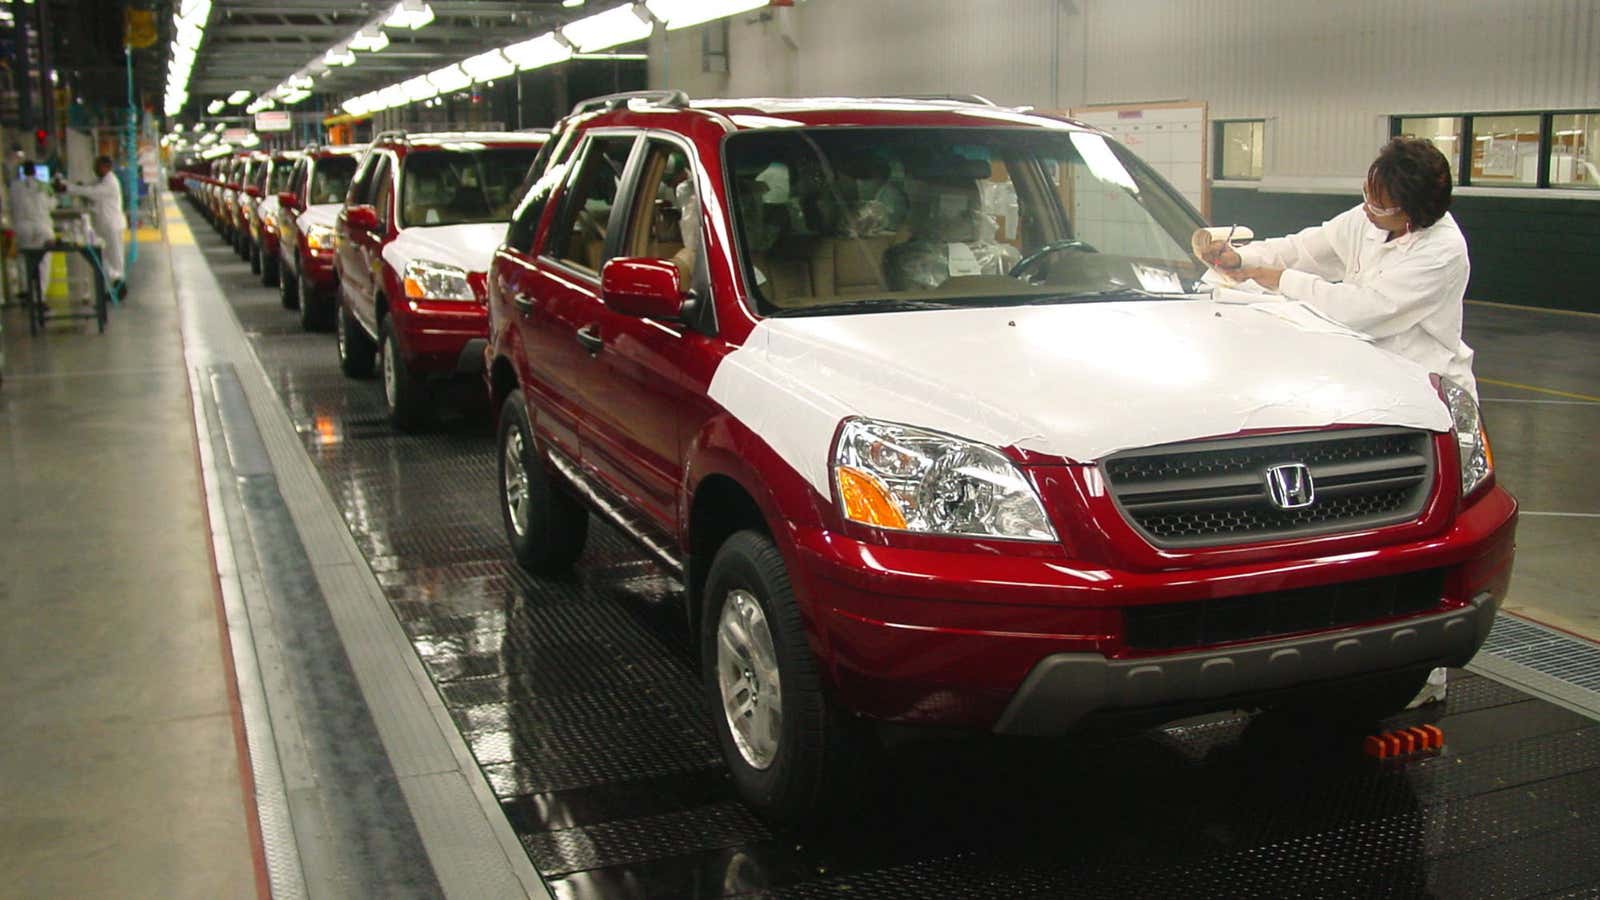 Honda pilots rolling off the production line in Alabama won’t have trouble finding a home.